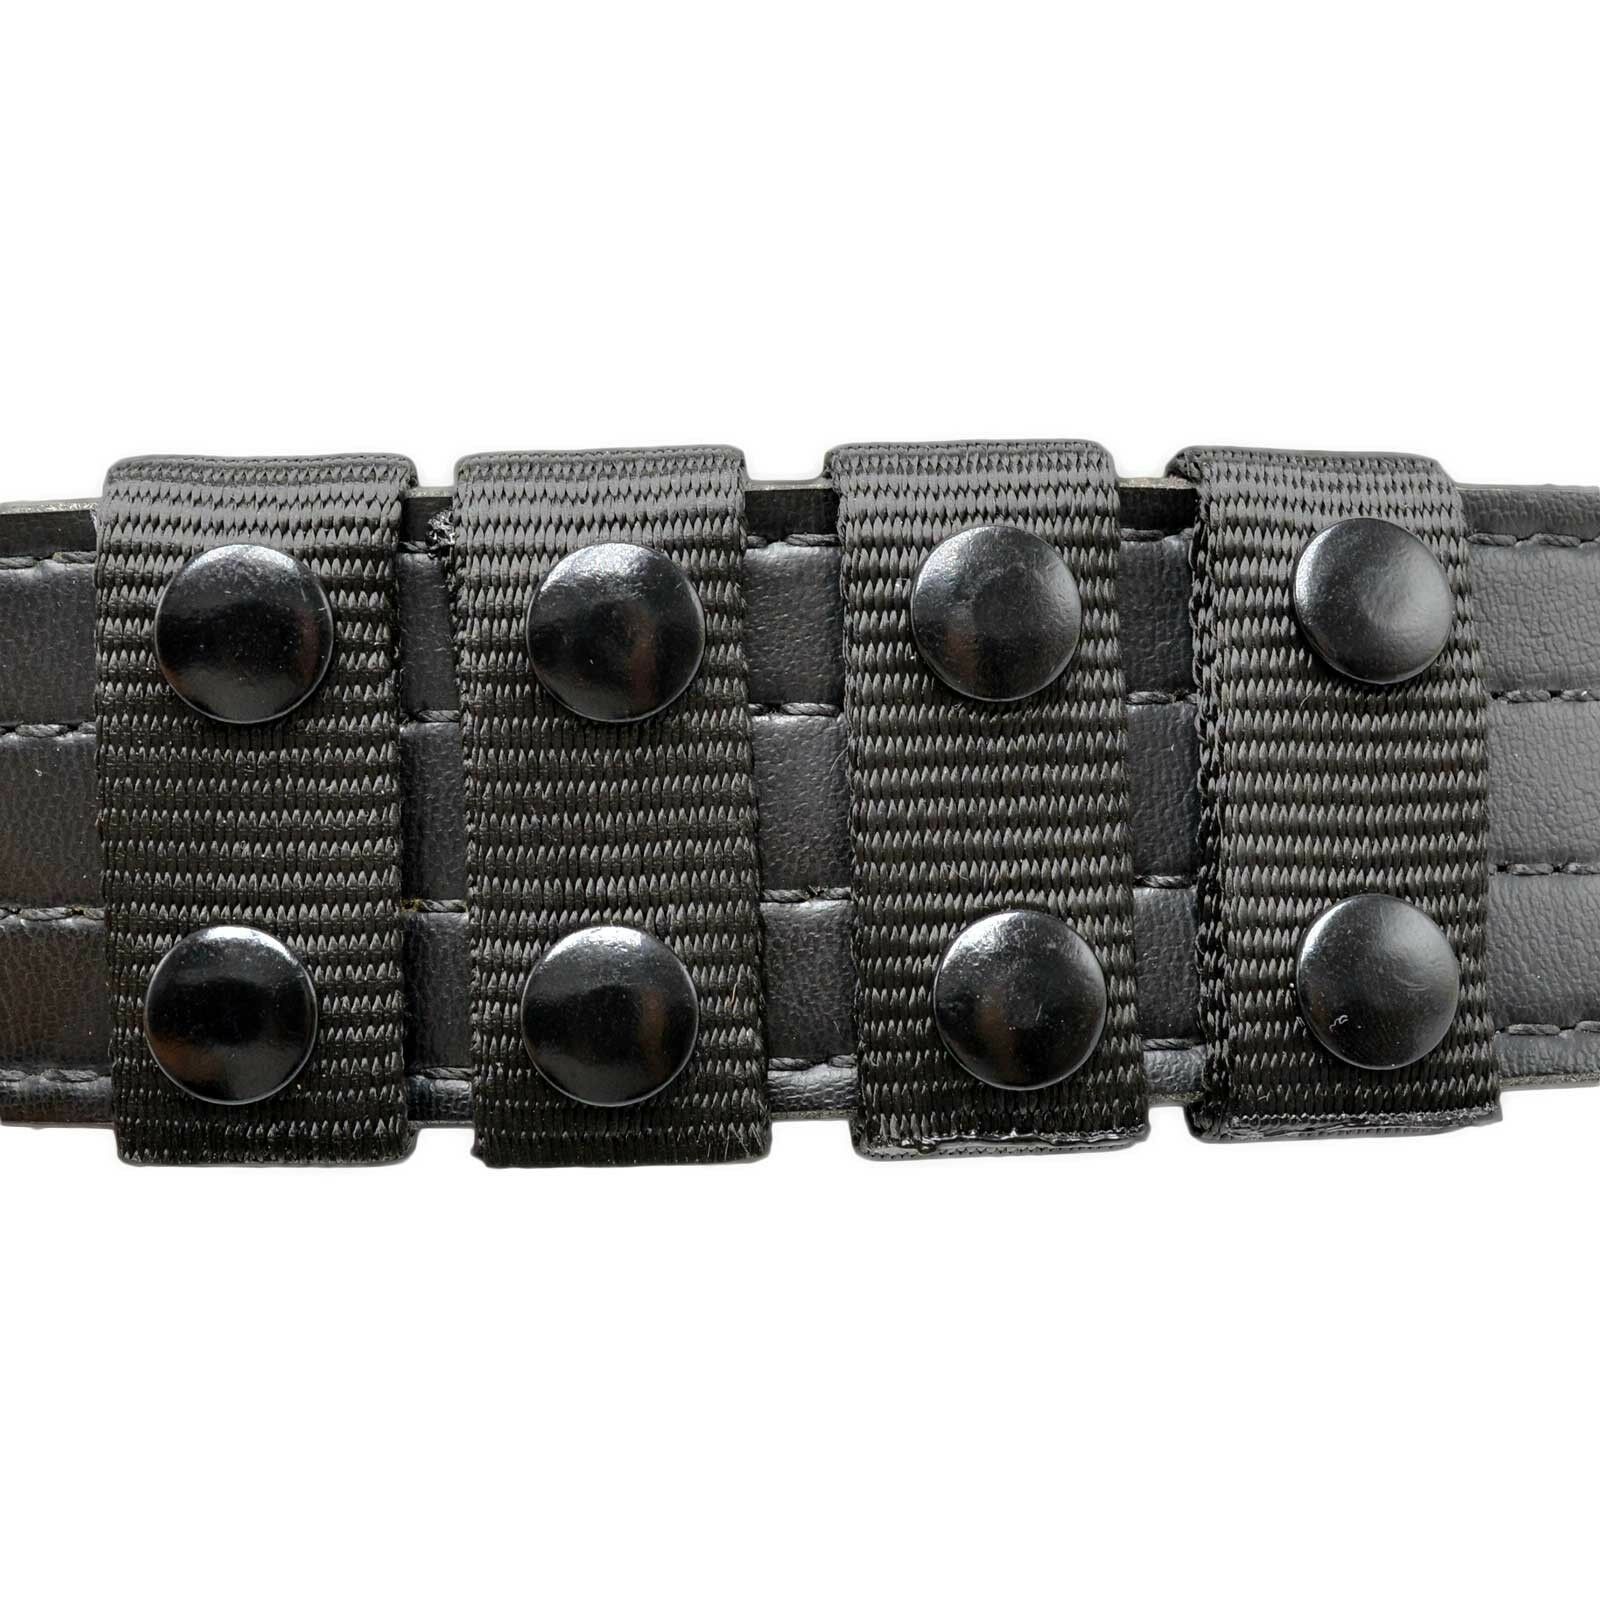 Perfect Fit Nylon Duty Belt Keepers 4 Pack Black Dual Snap 1"